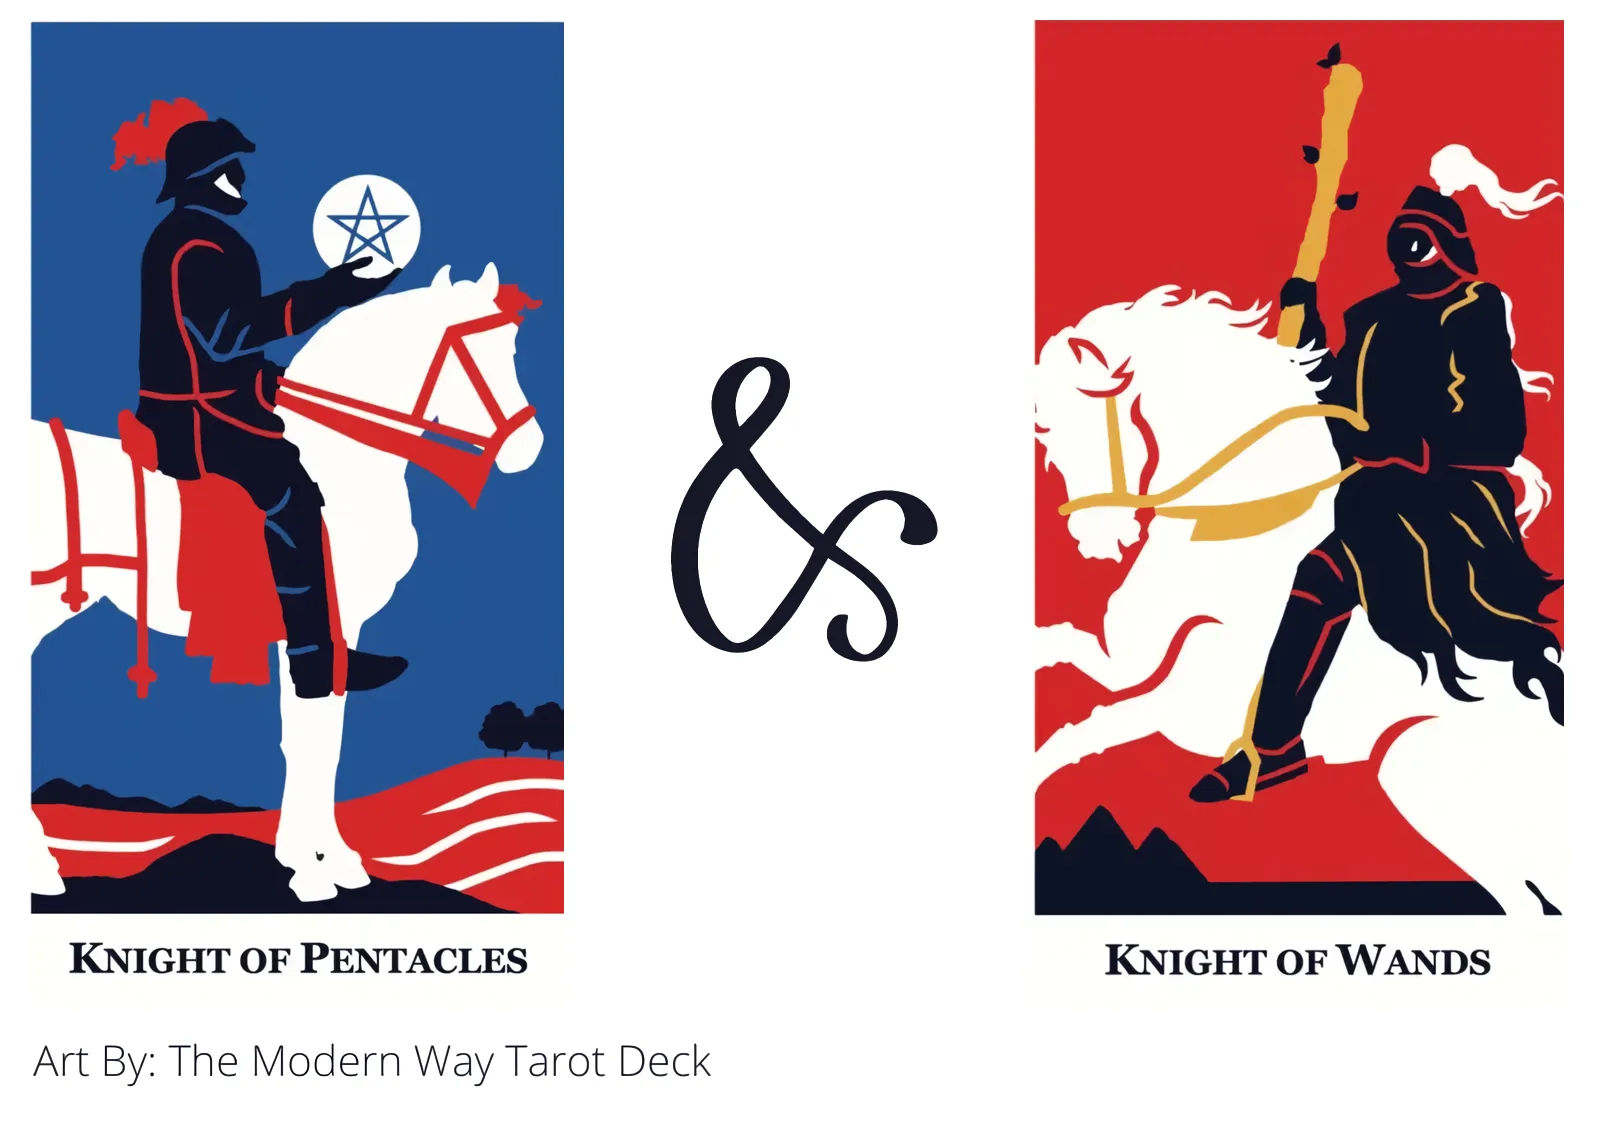 knight of pentacles and knight of wands tarot cards together